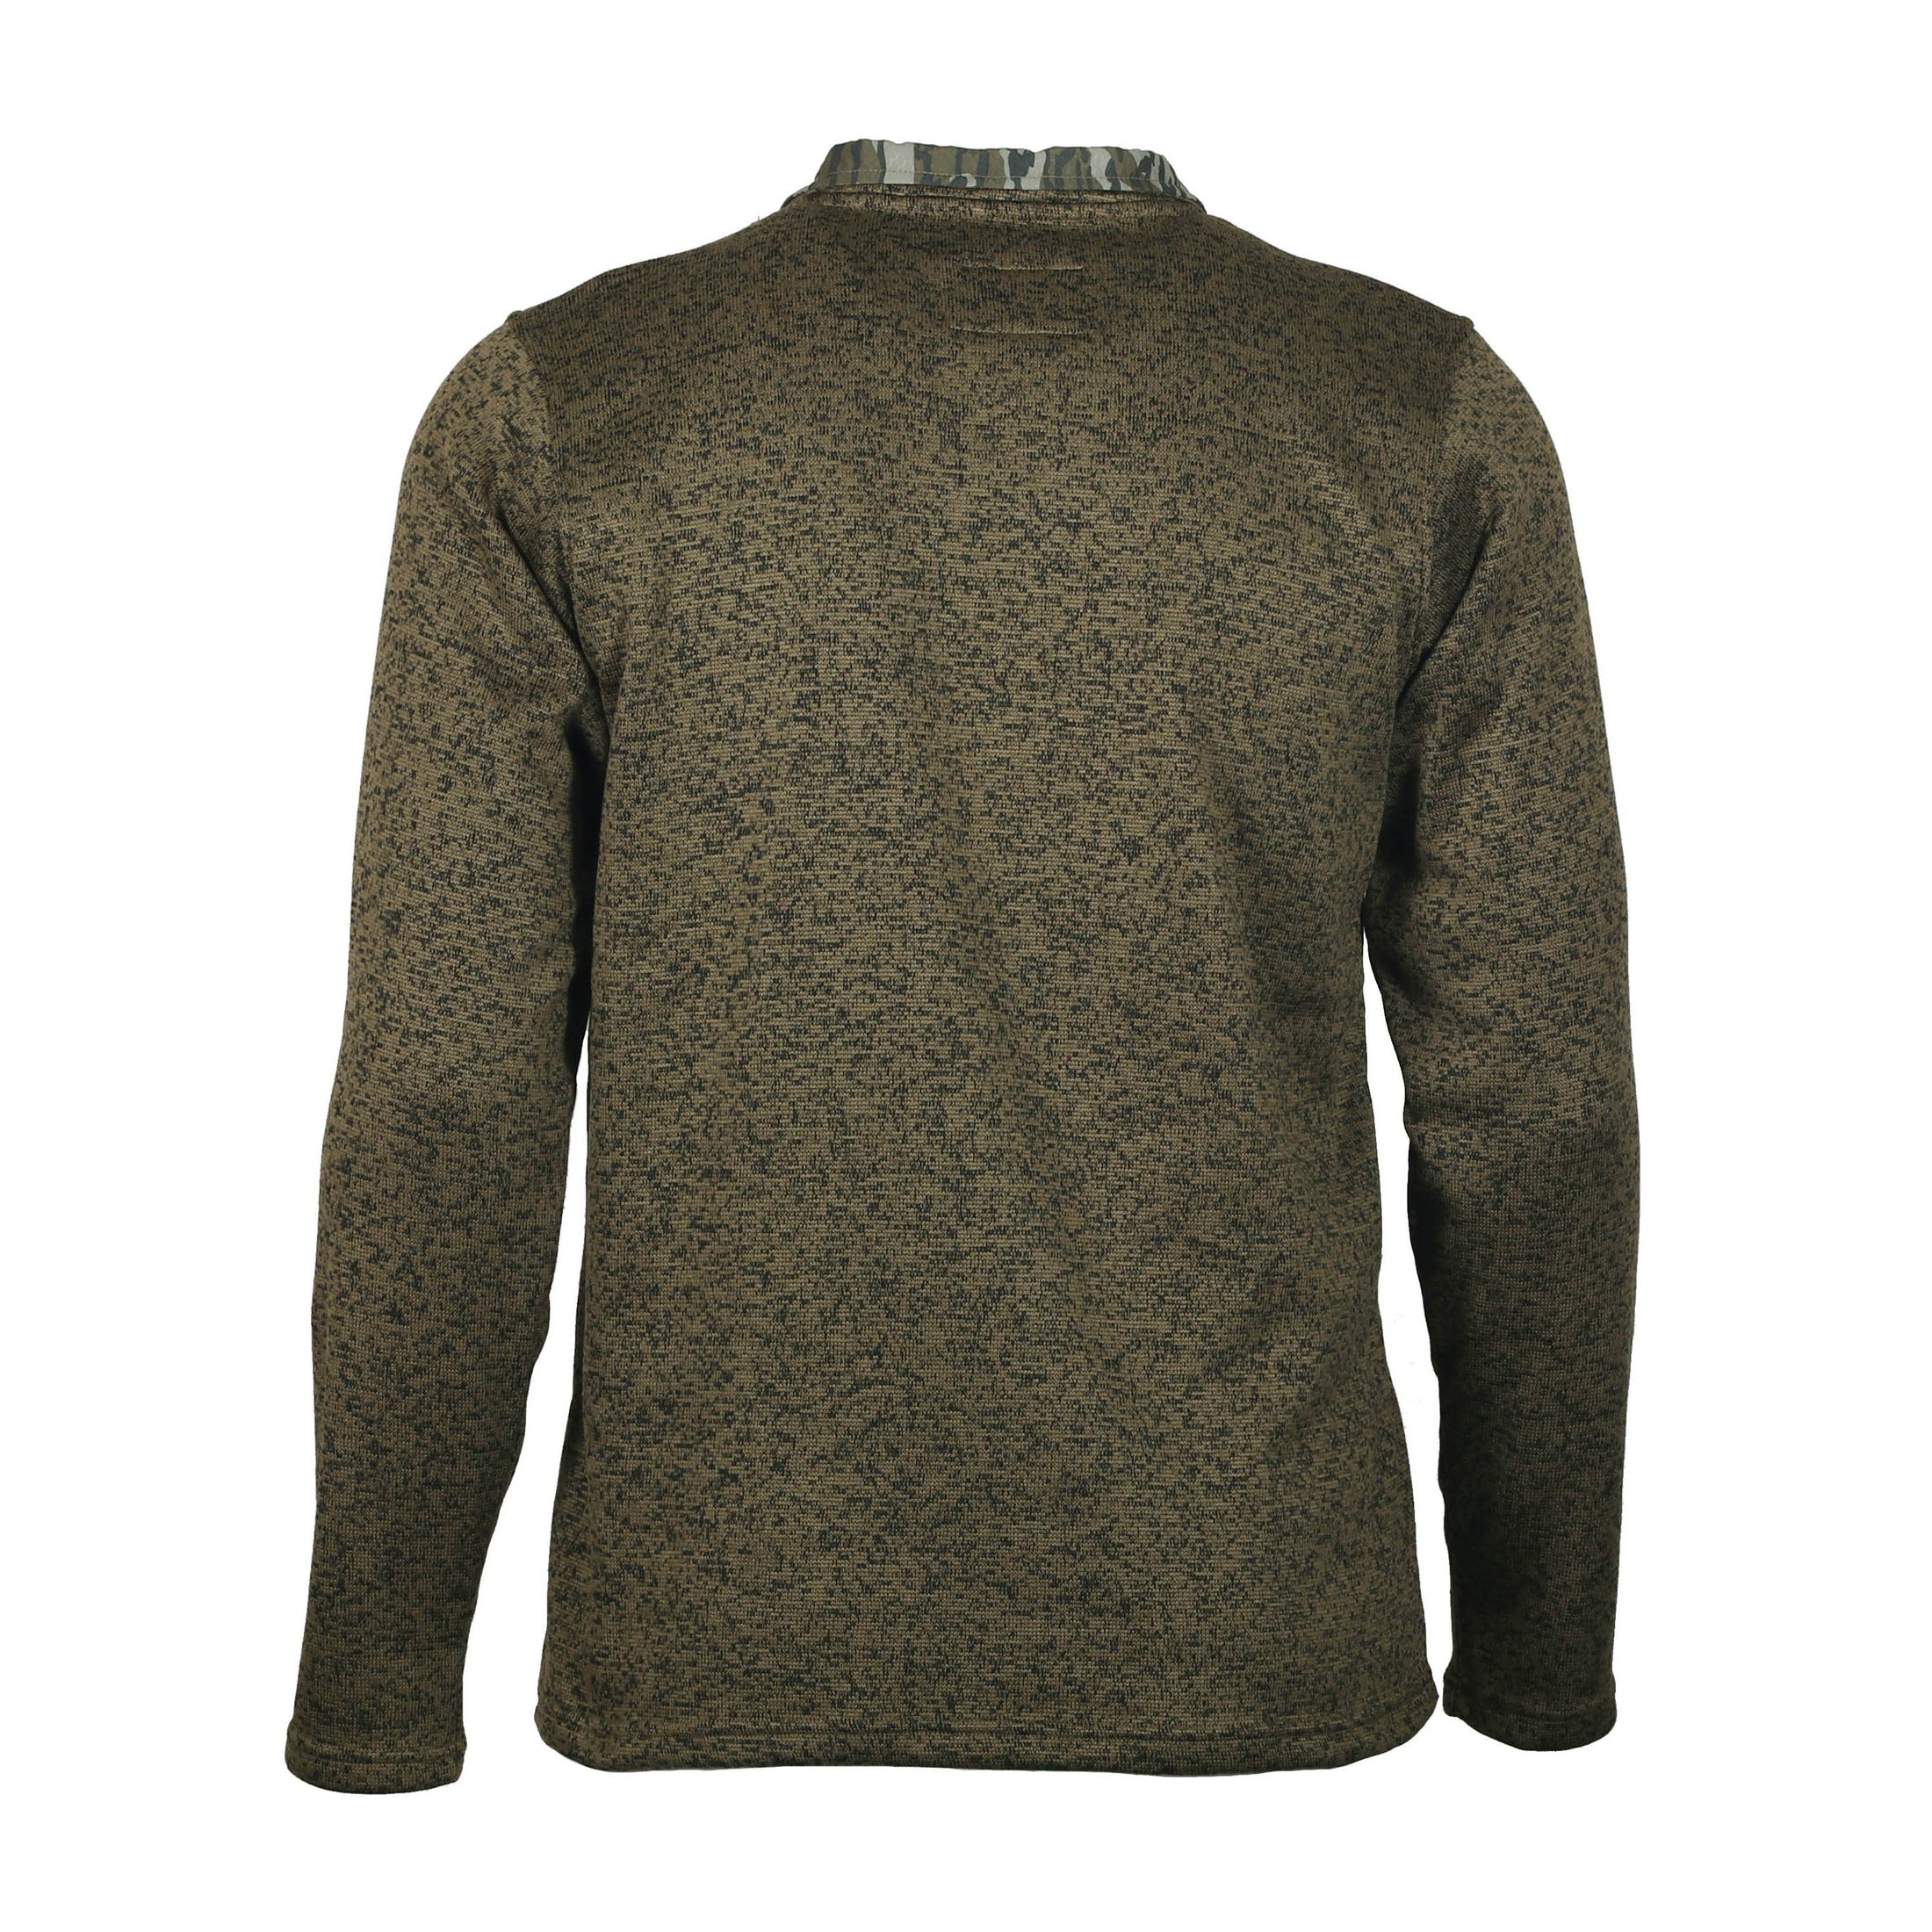 Gamekeeper wing shooter pullover back view (bark/bottomland)